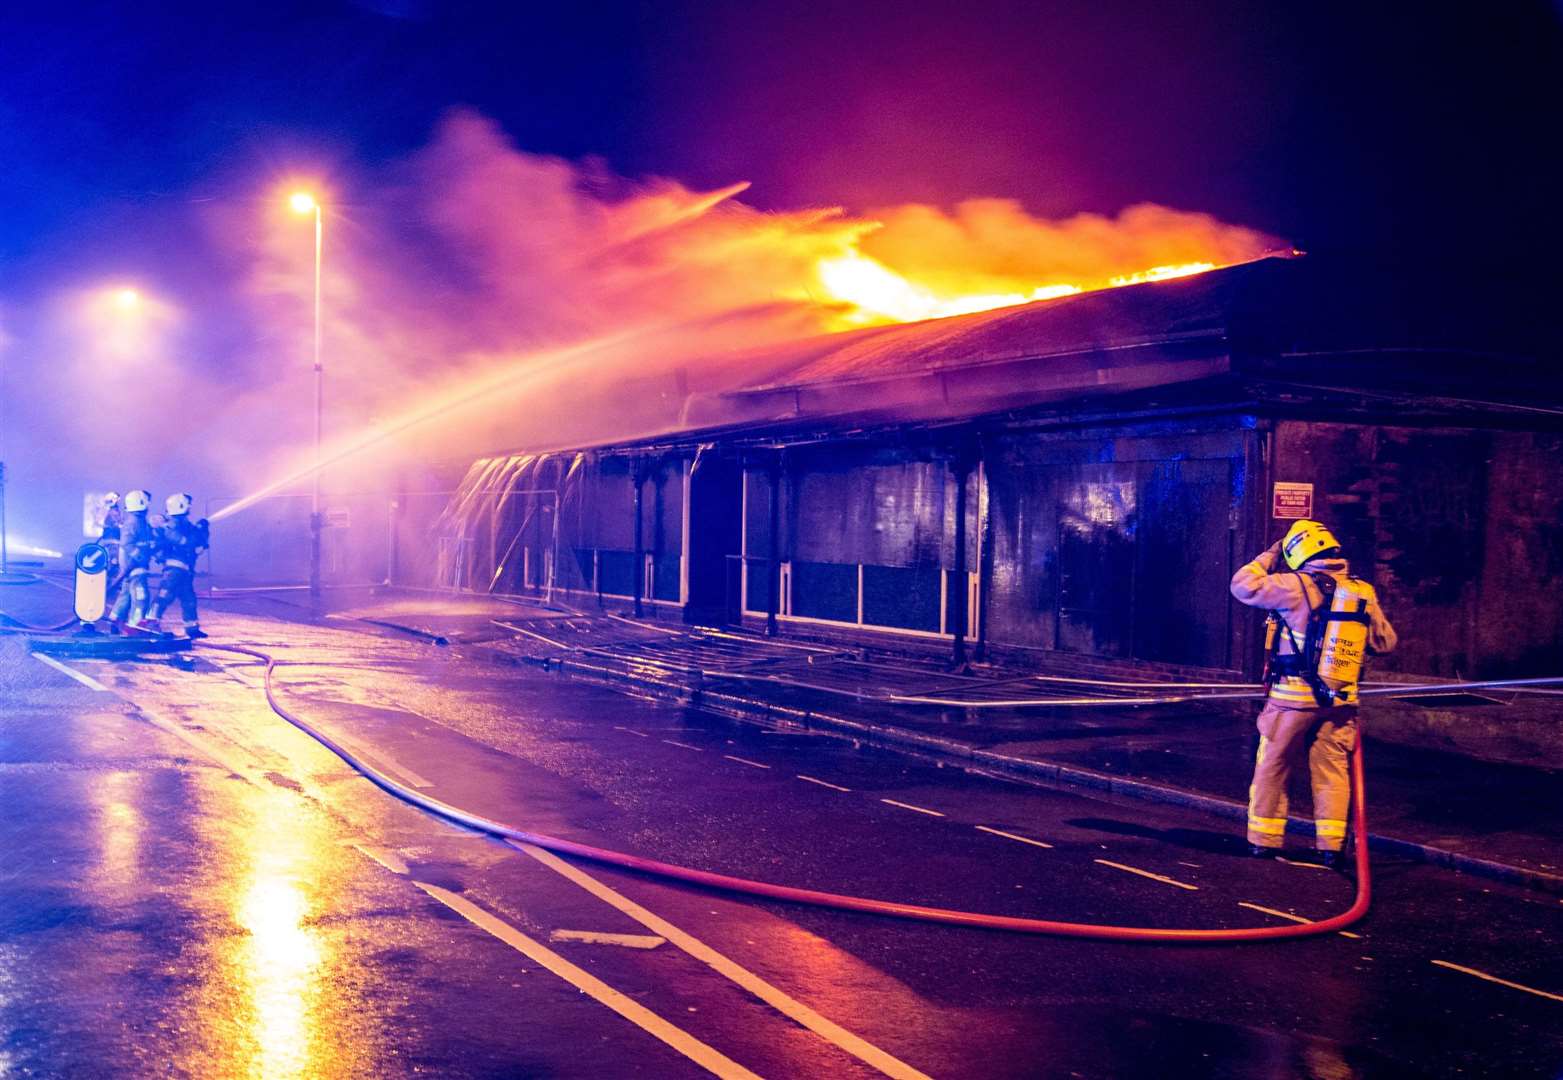 The huge fire at Onyx nightclub on March 8, 2016. Picture: Dan Desborough